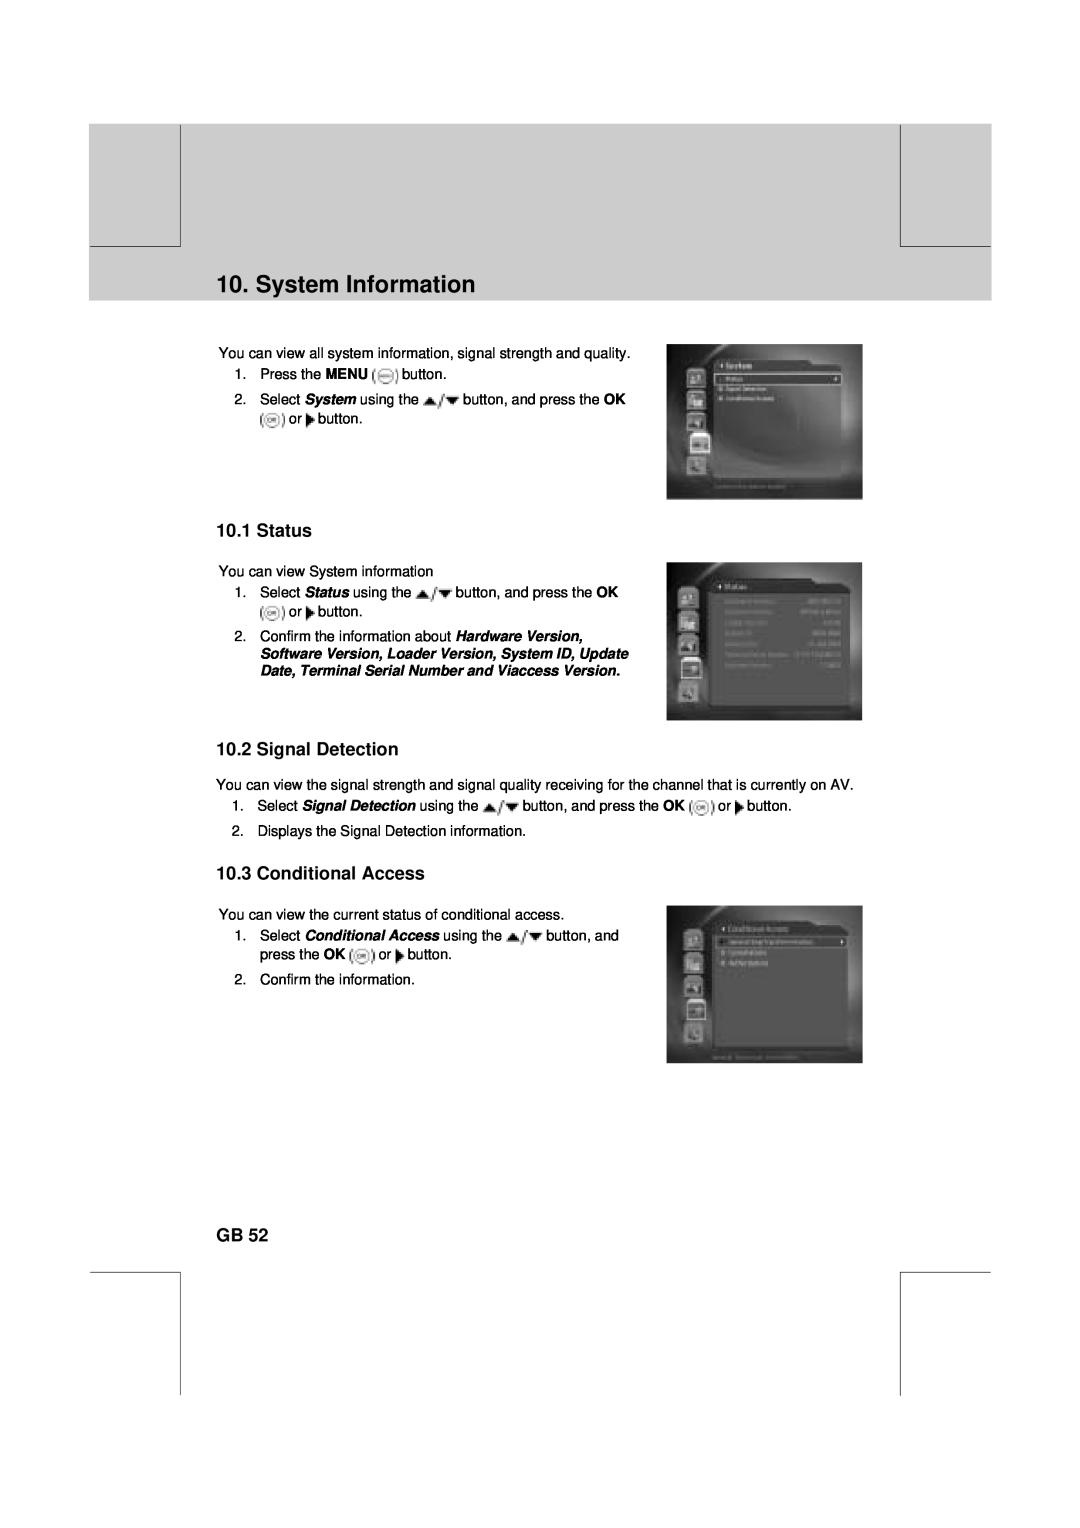 Humax VA-FOX T manual System Information, Status, Signal Detection, Conditional Access 